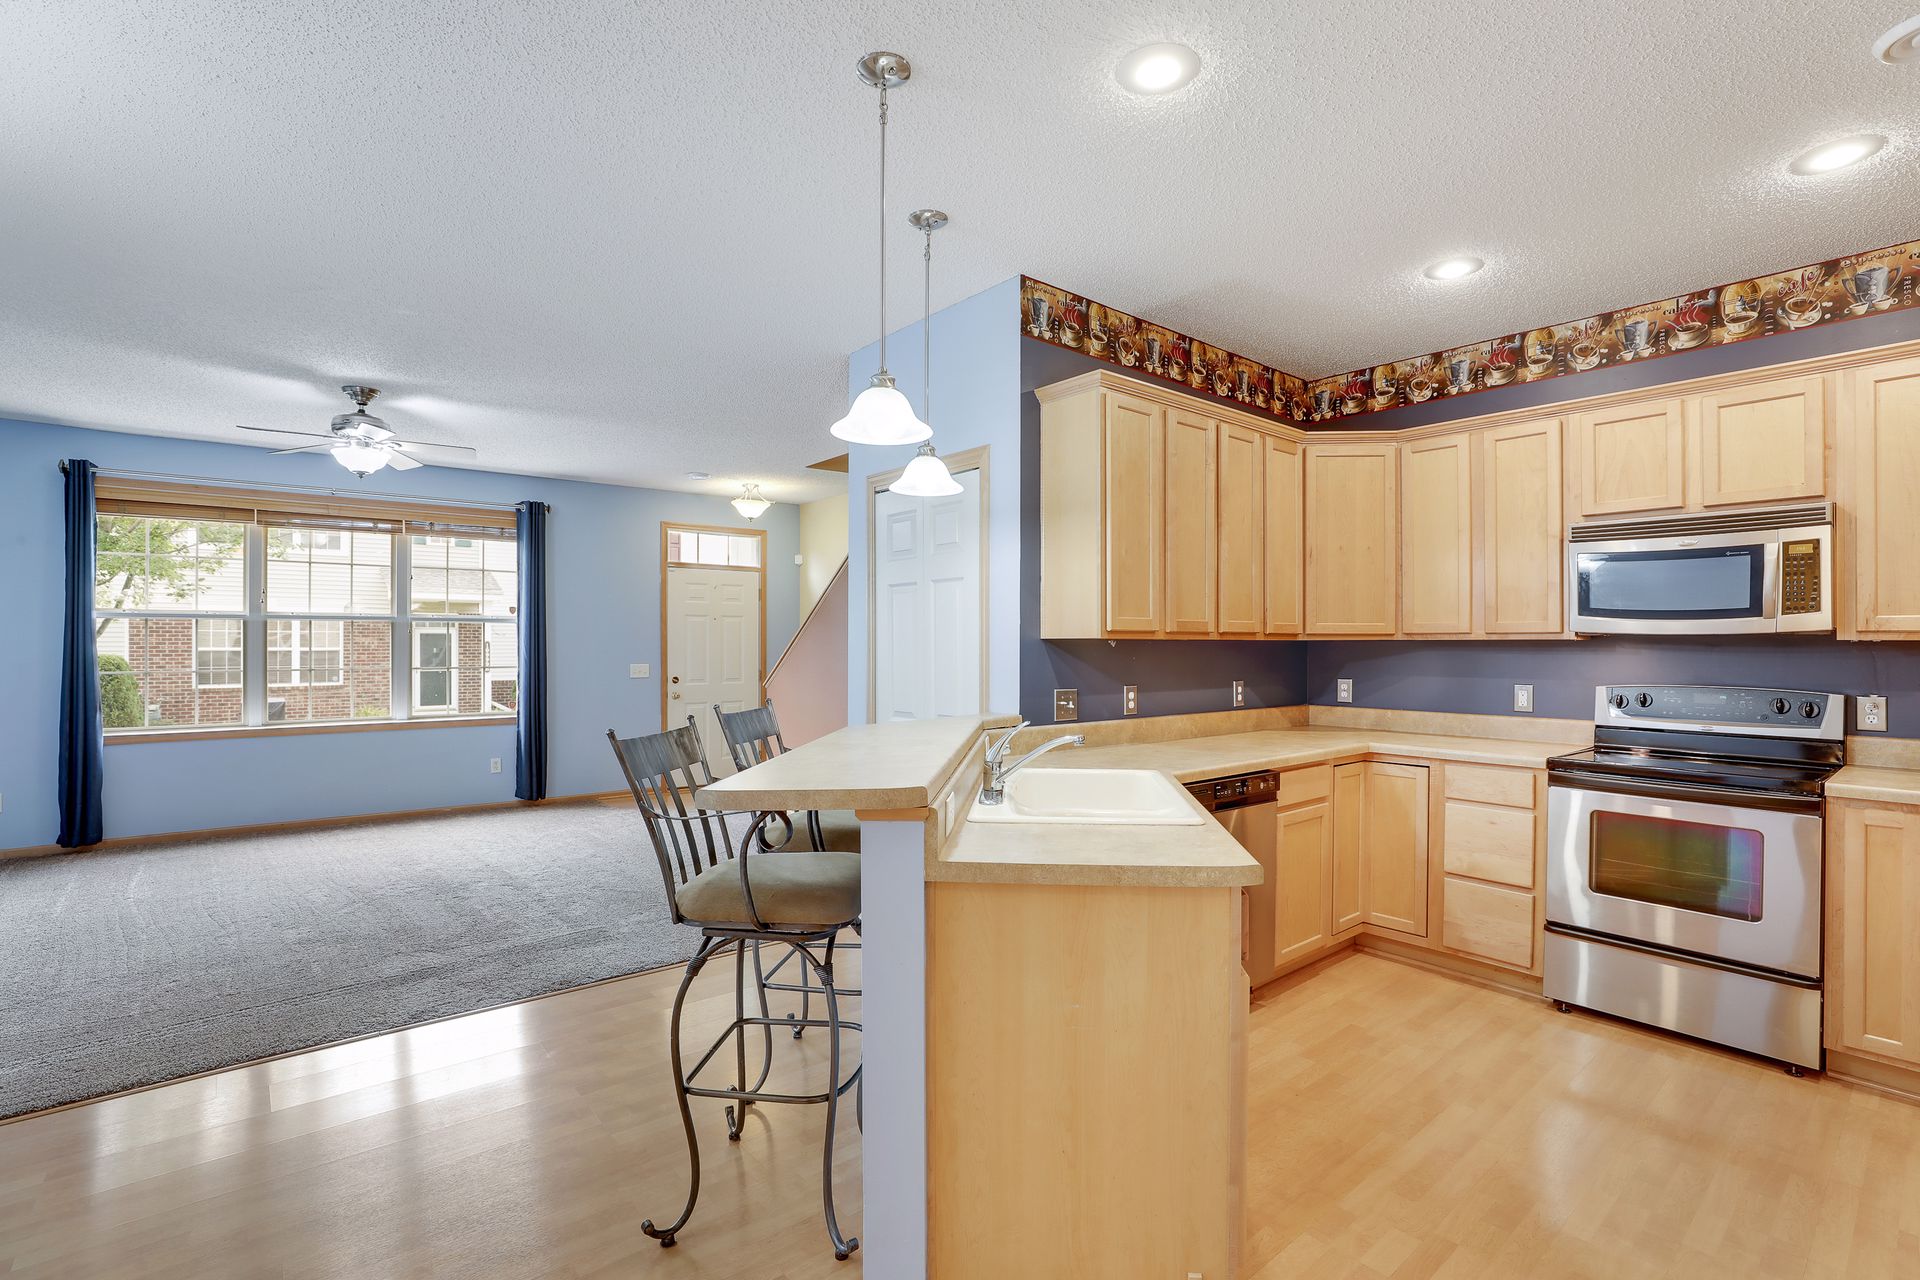 Woodbury Townhome for sale Kitchen